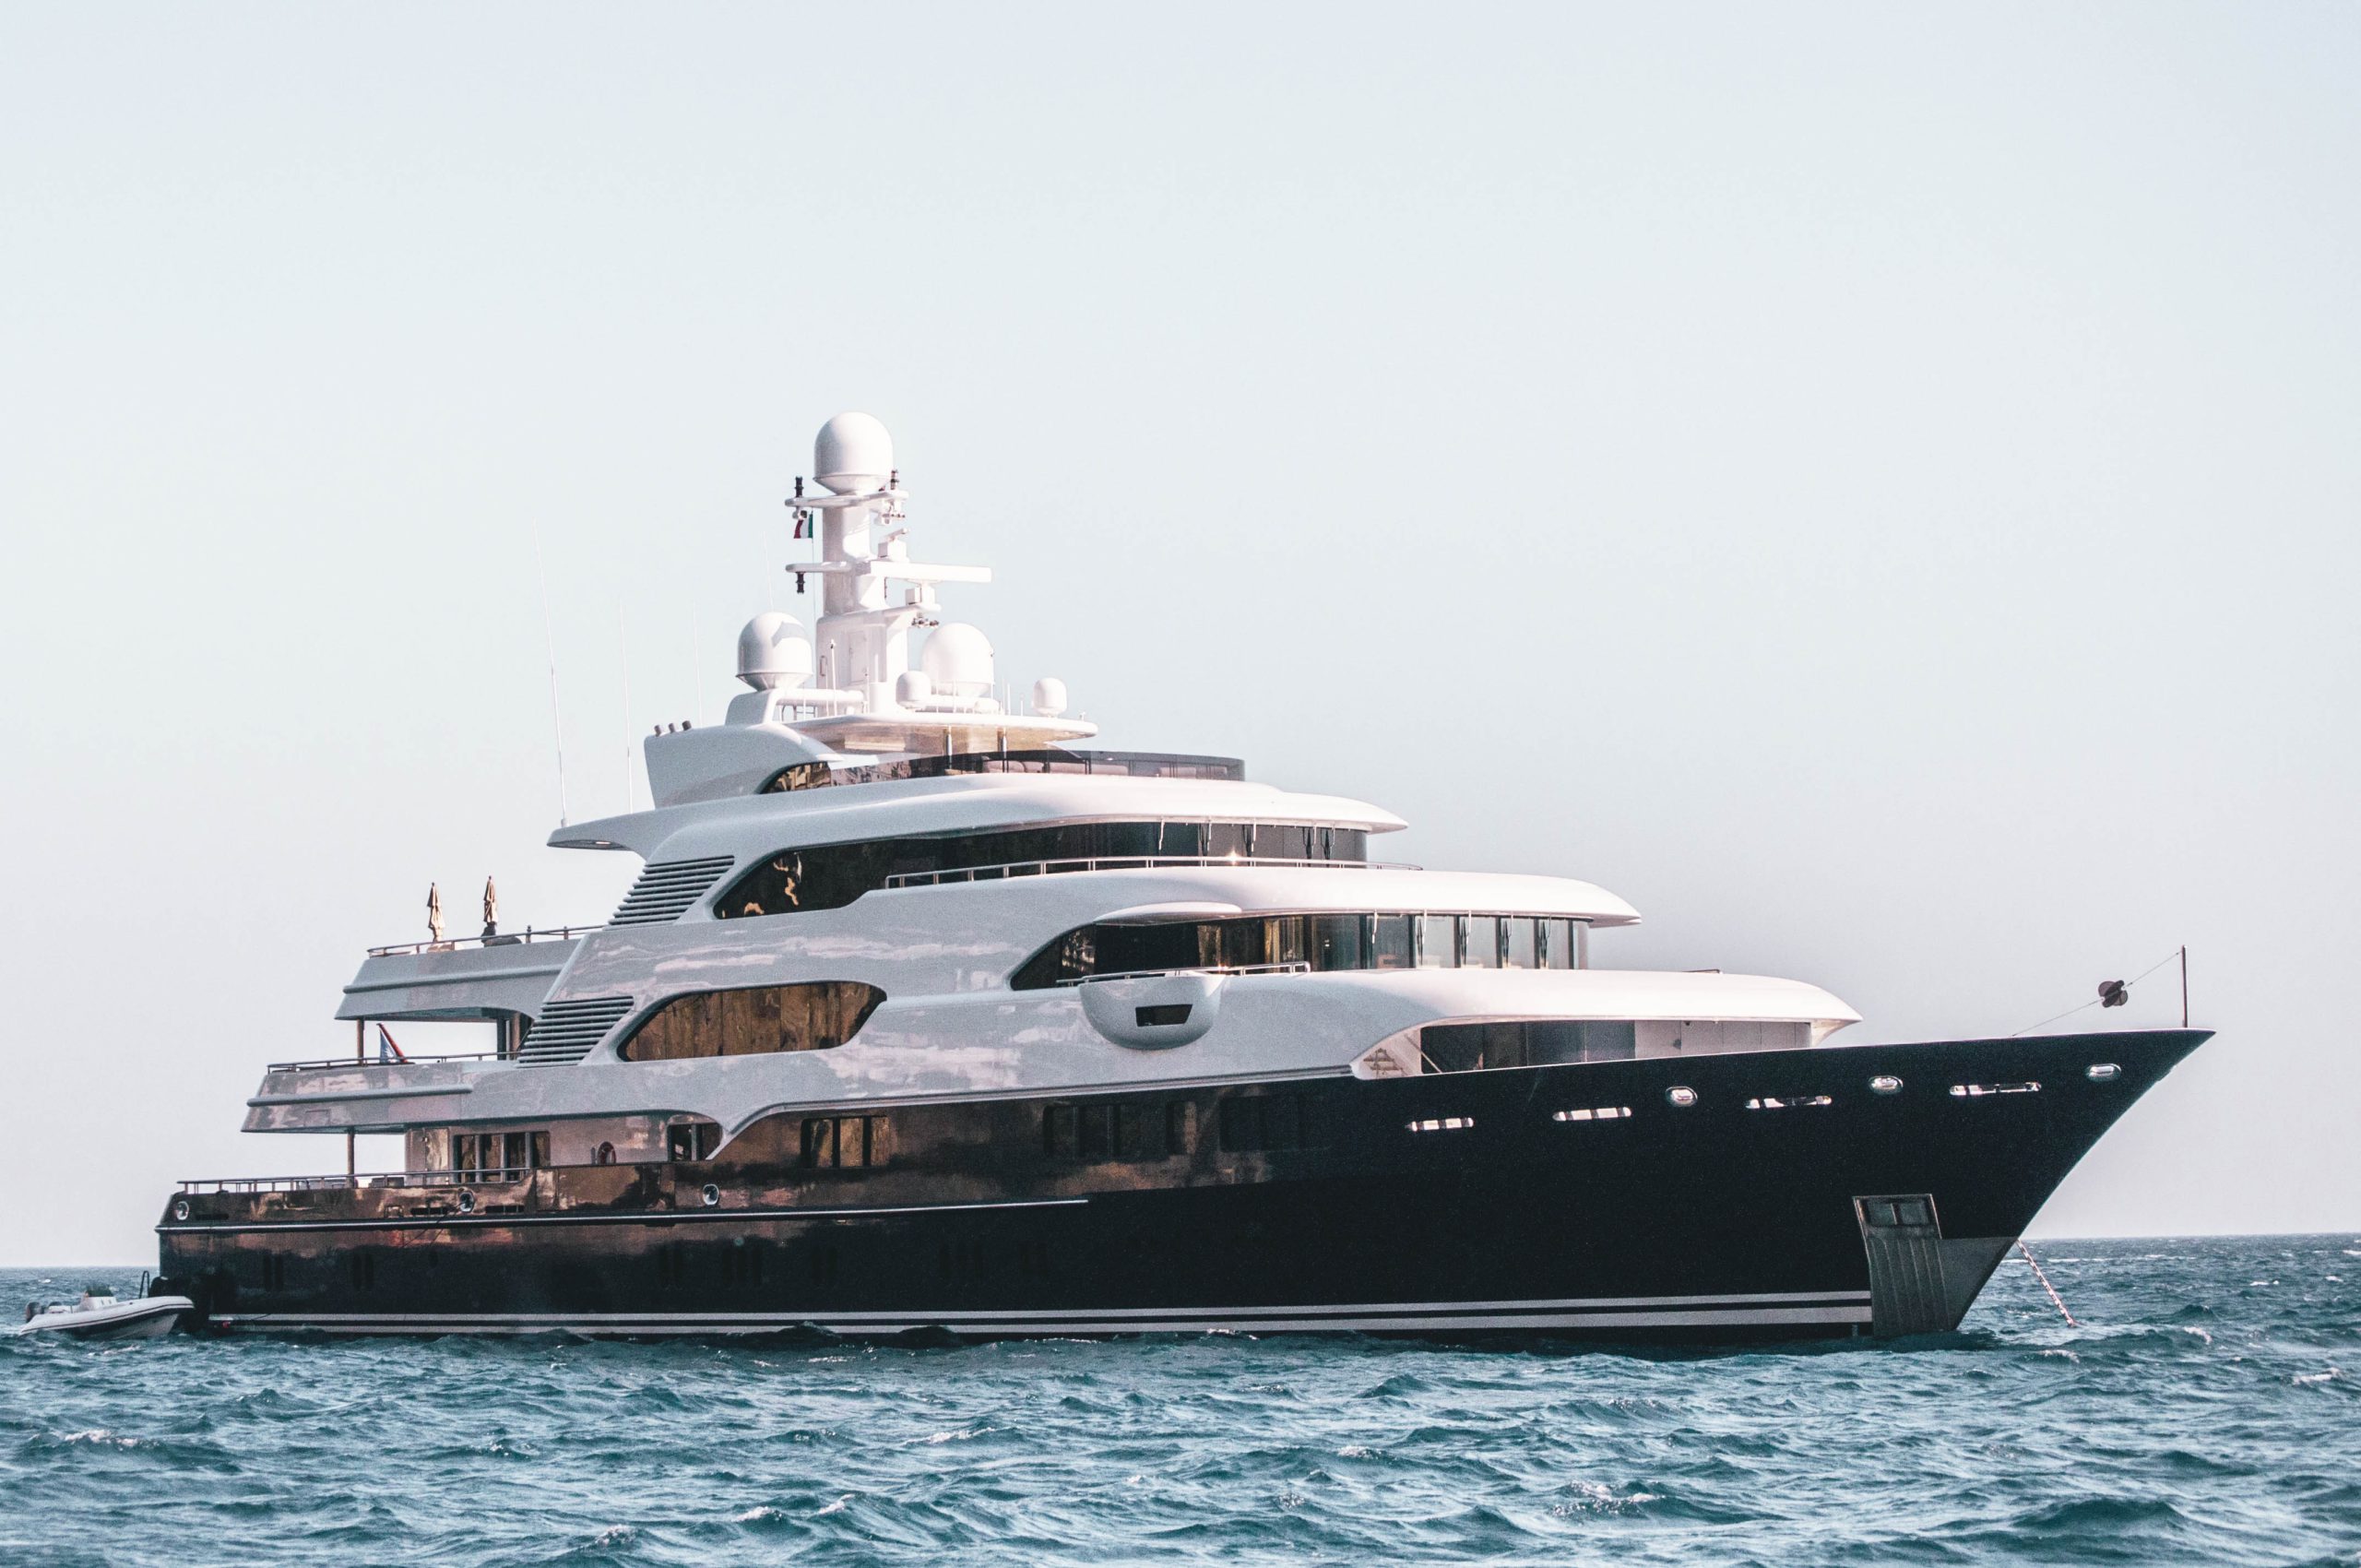 The most private holiday is aboard a superyacht FGI